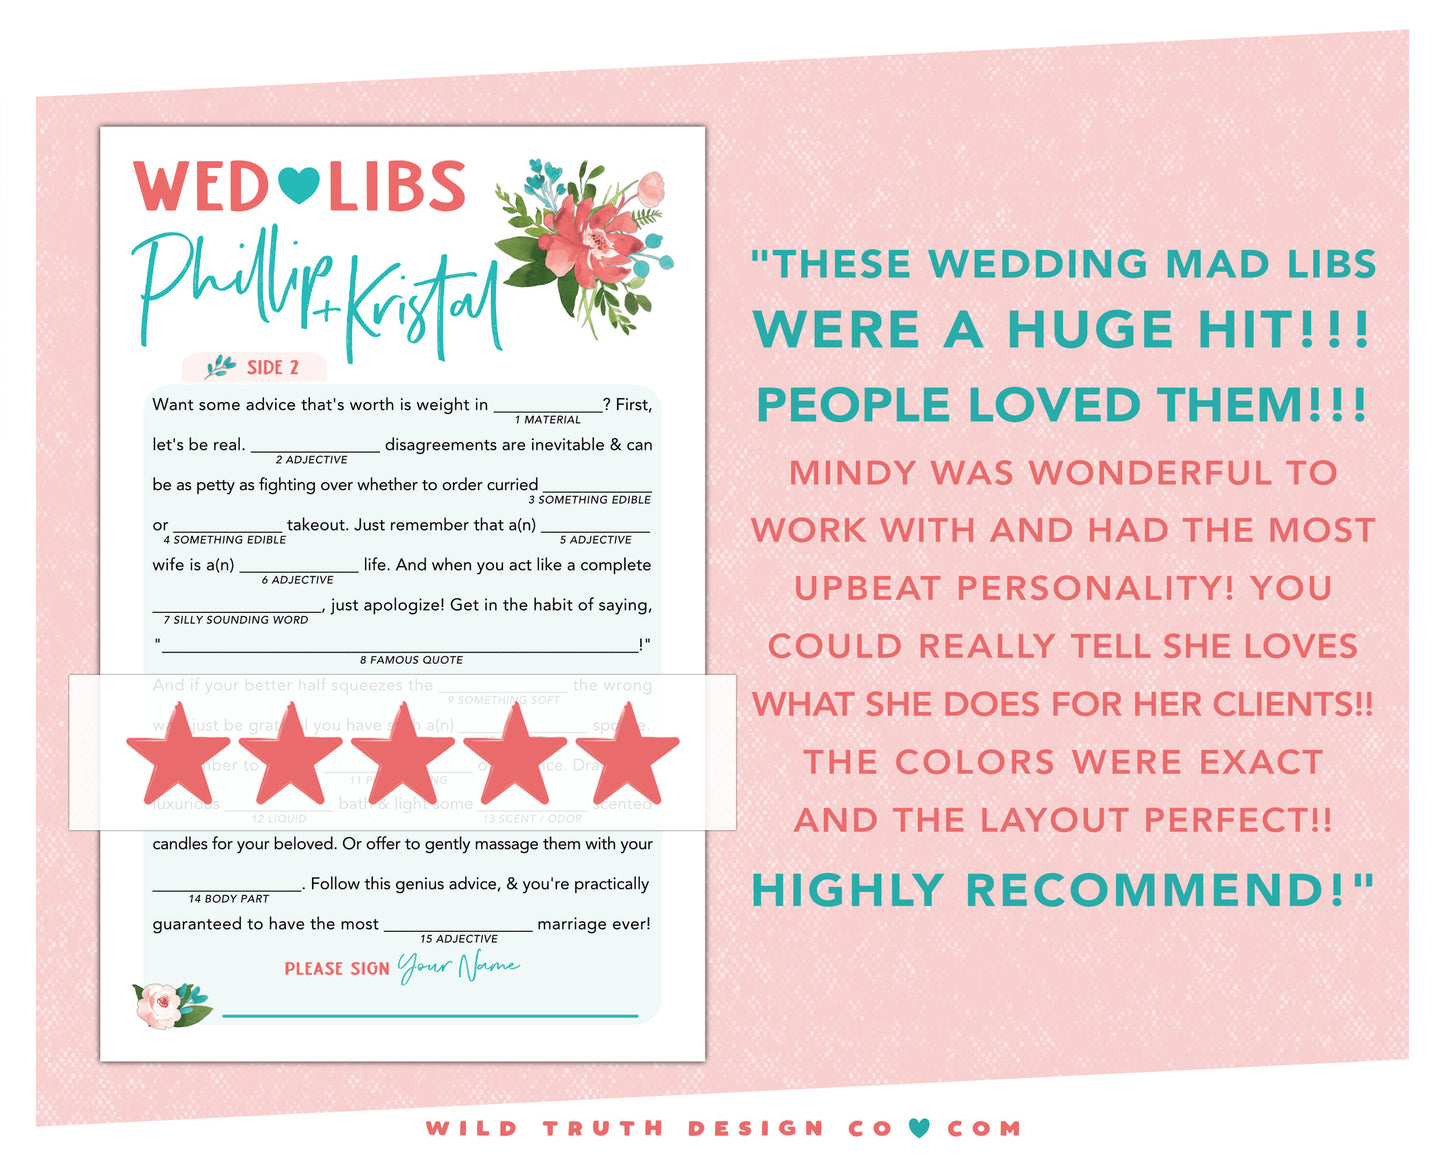 Personalized Wed Libs - Printed Cards - Marriage Advice Madlib Game - Wedding Guest Book - Floral Tropical Plants - Rehearsal Dinner - Engagement Party - Bridal Shower - Reception - Bachelorette - Couples Shower Mad Lib